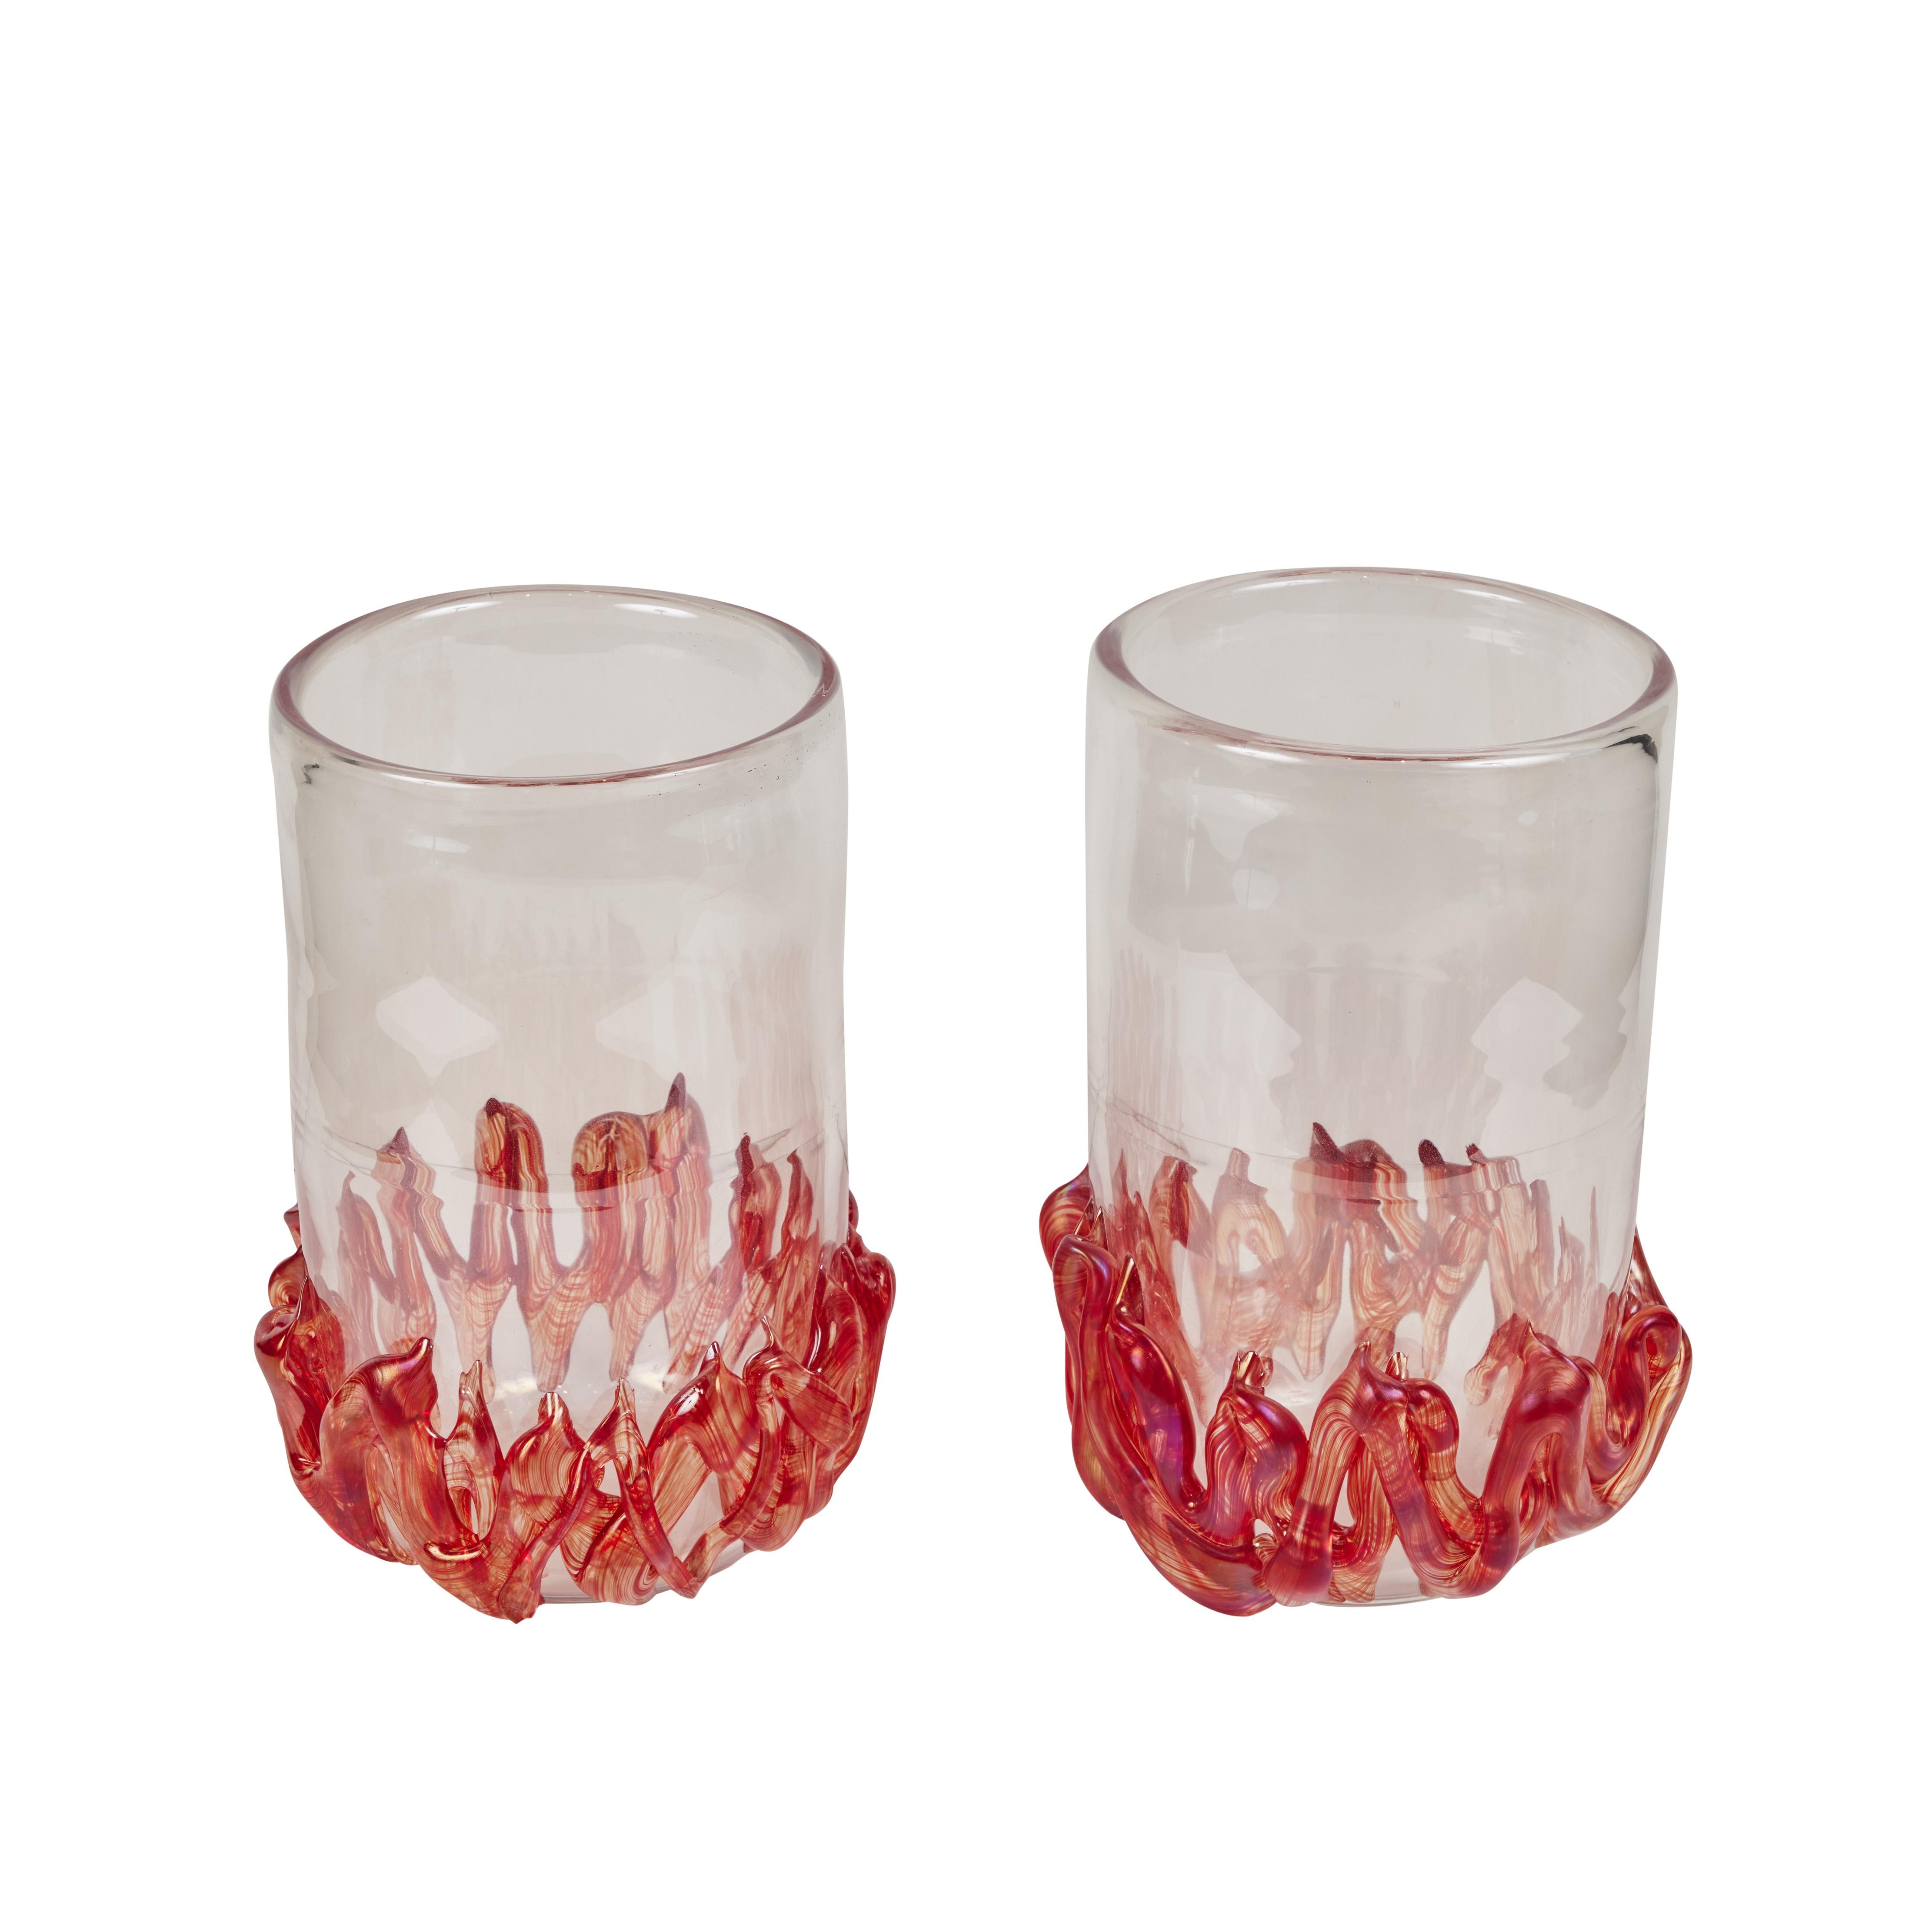 Pair of clear glass murano vases embellished with variegated red glass flames. Signed on the bottom.